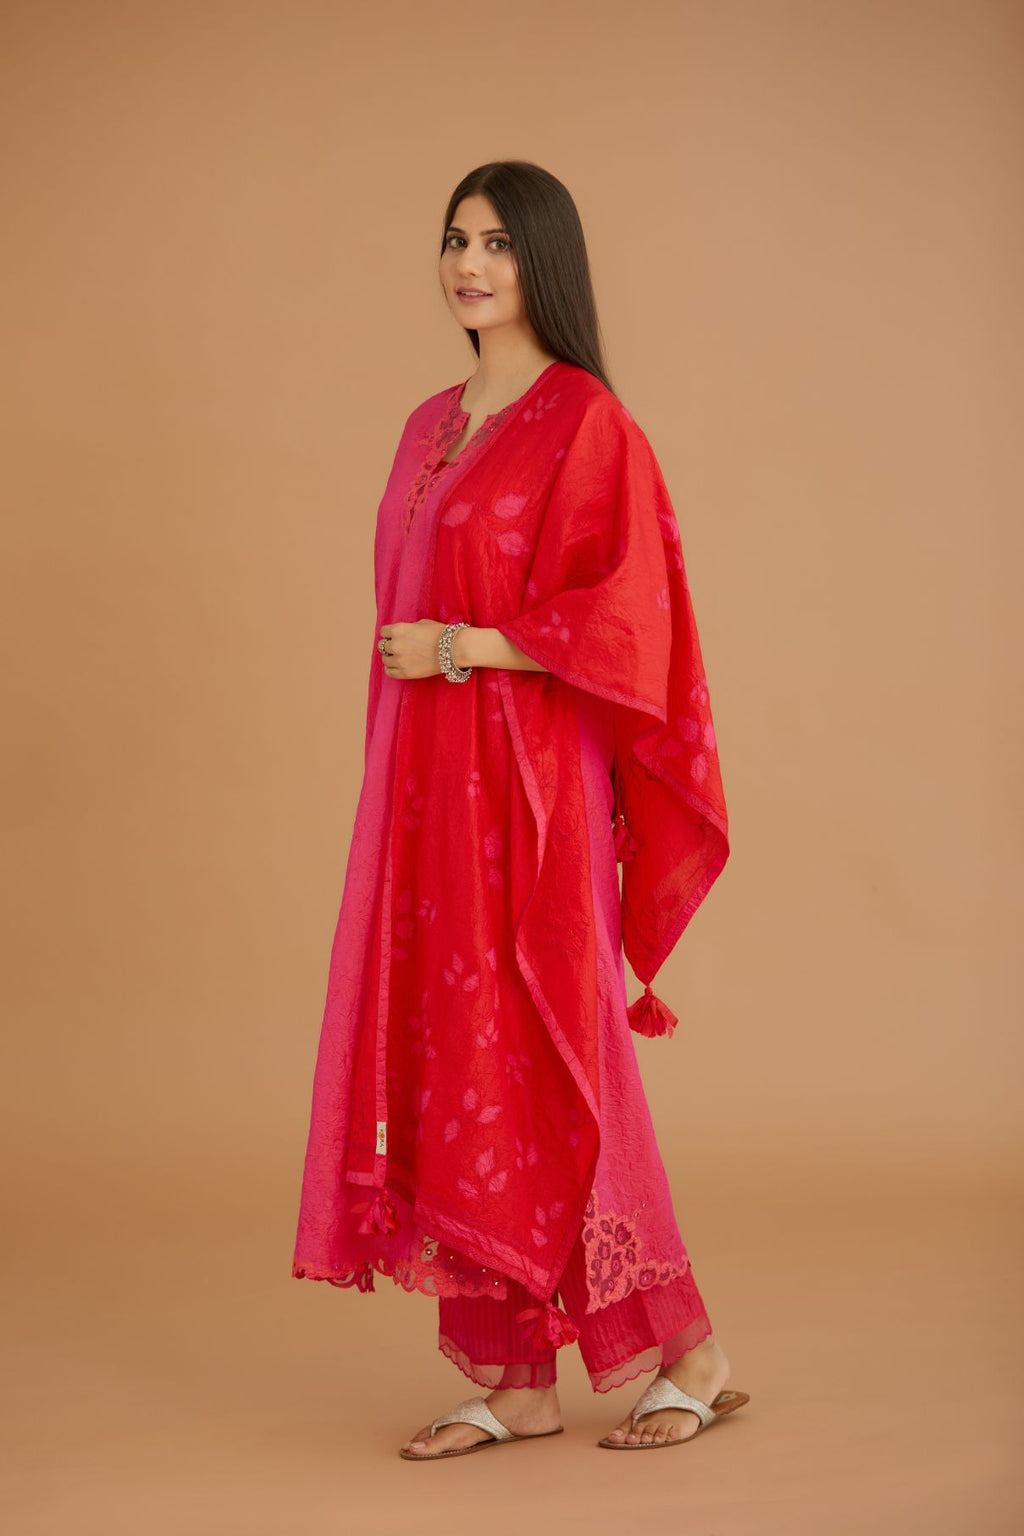 Red hand crushed silk stole with silk fabric applique work and embroidery at edges.